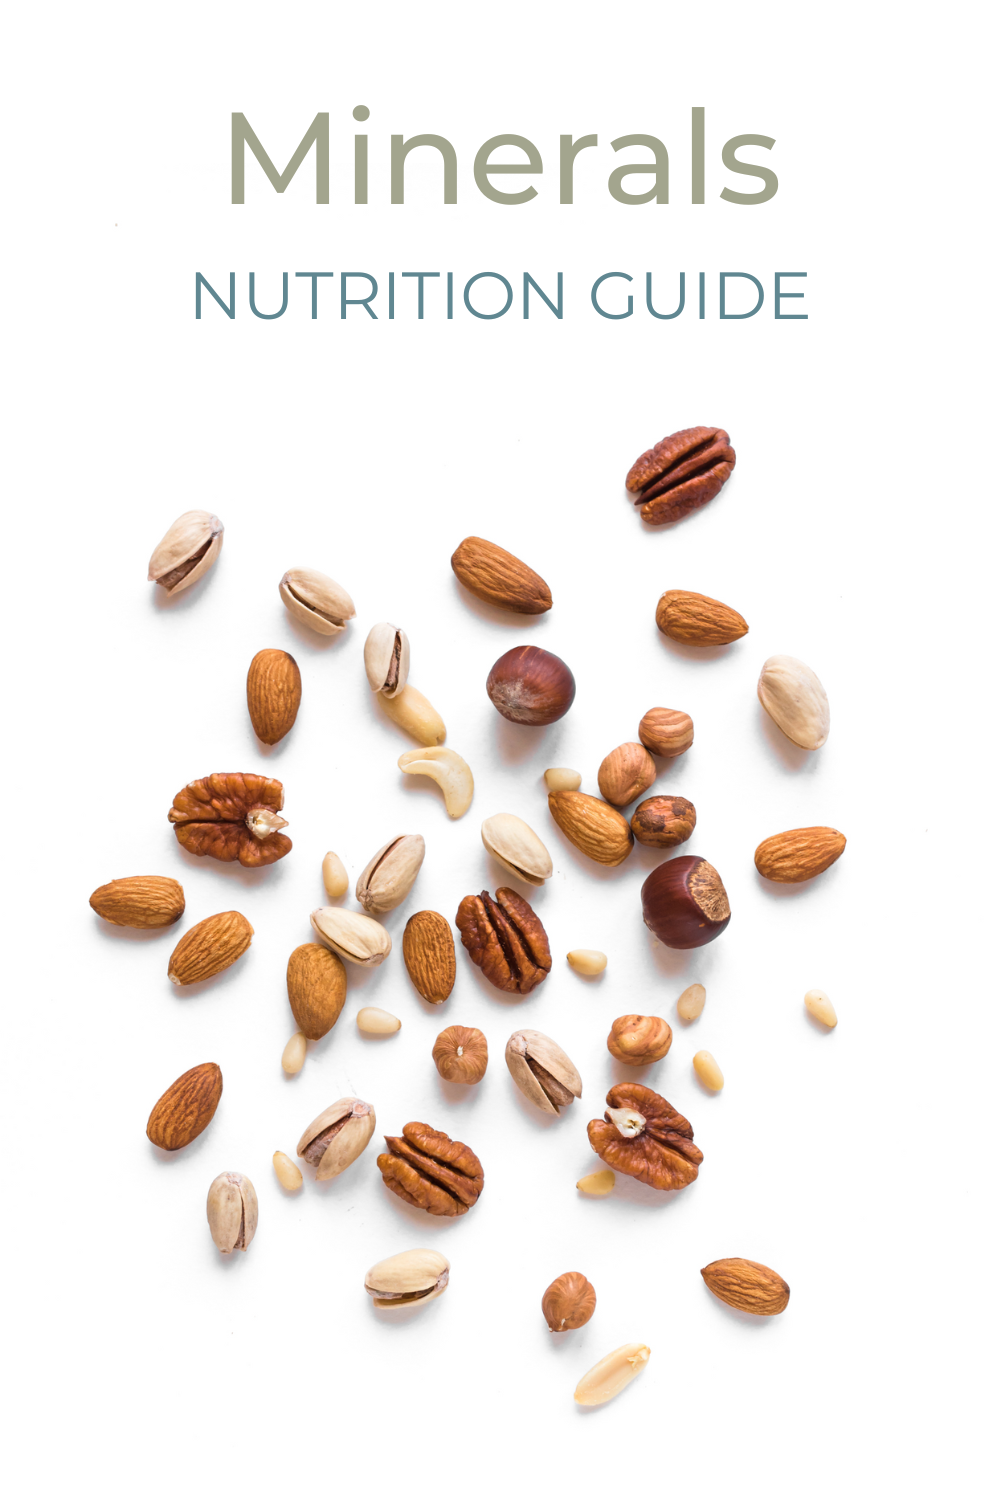 Get the Minerals Nutrition Guide!